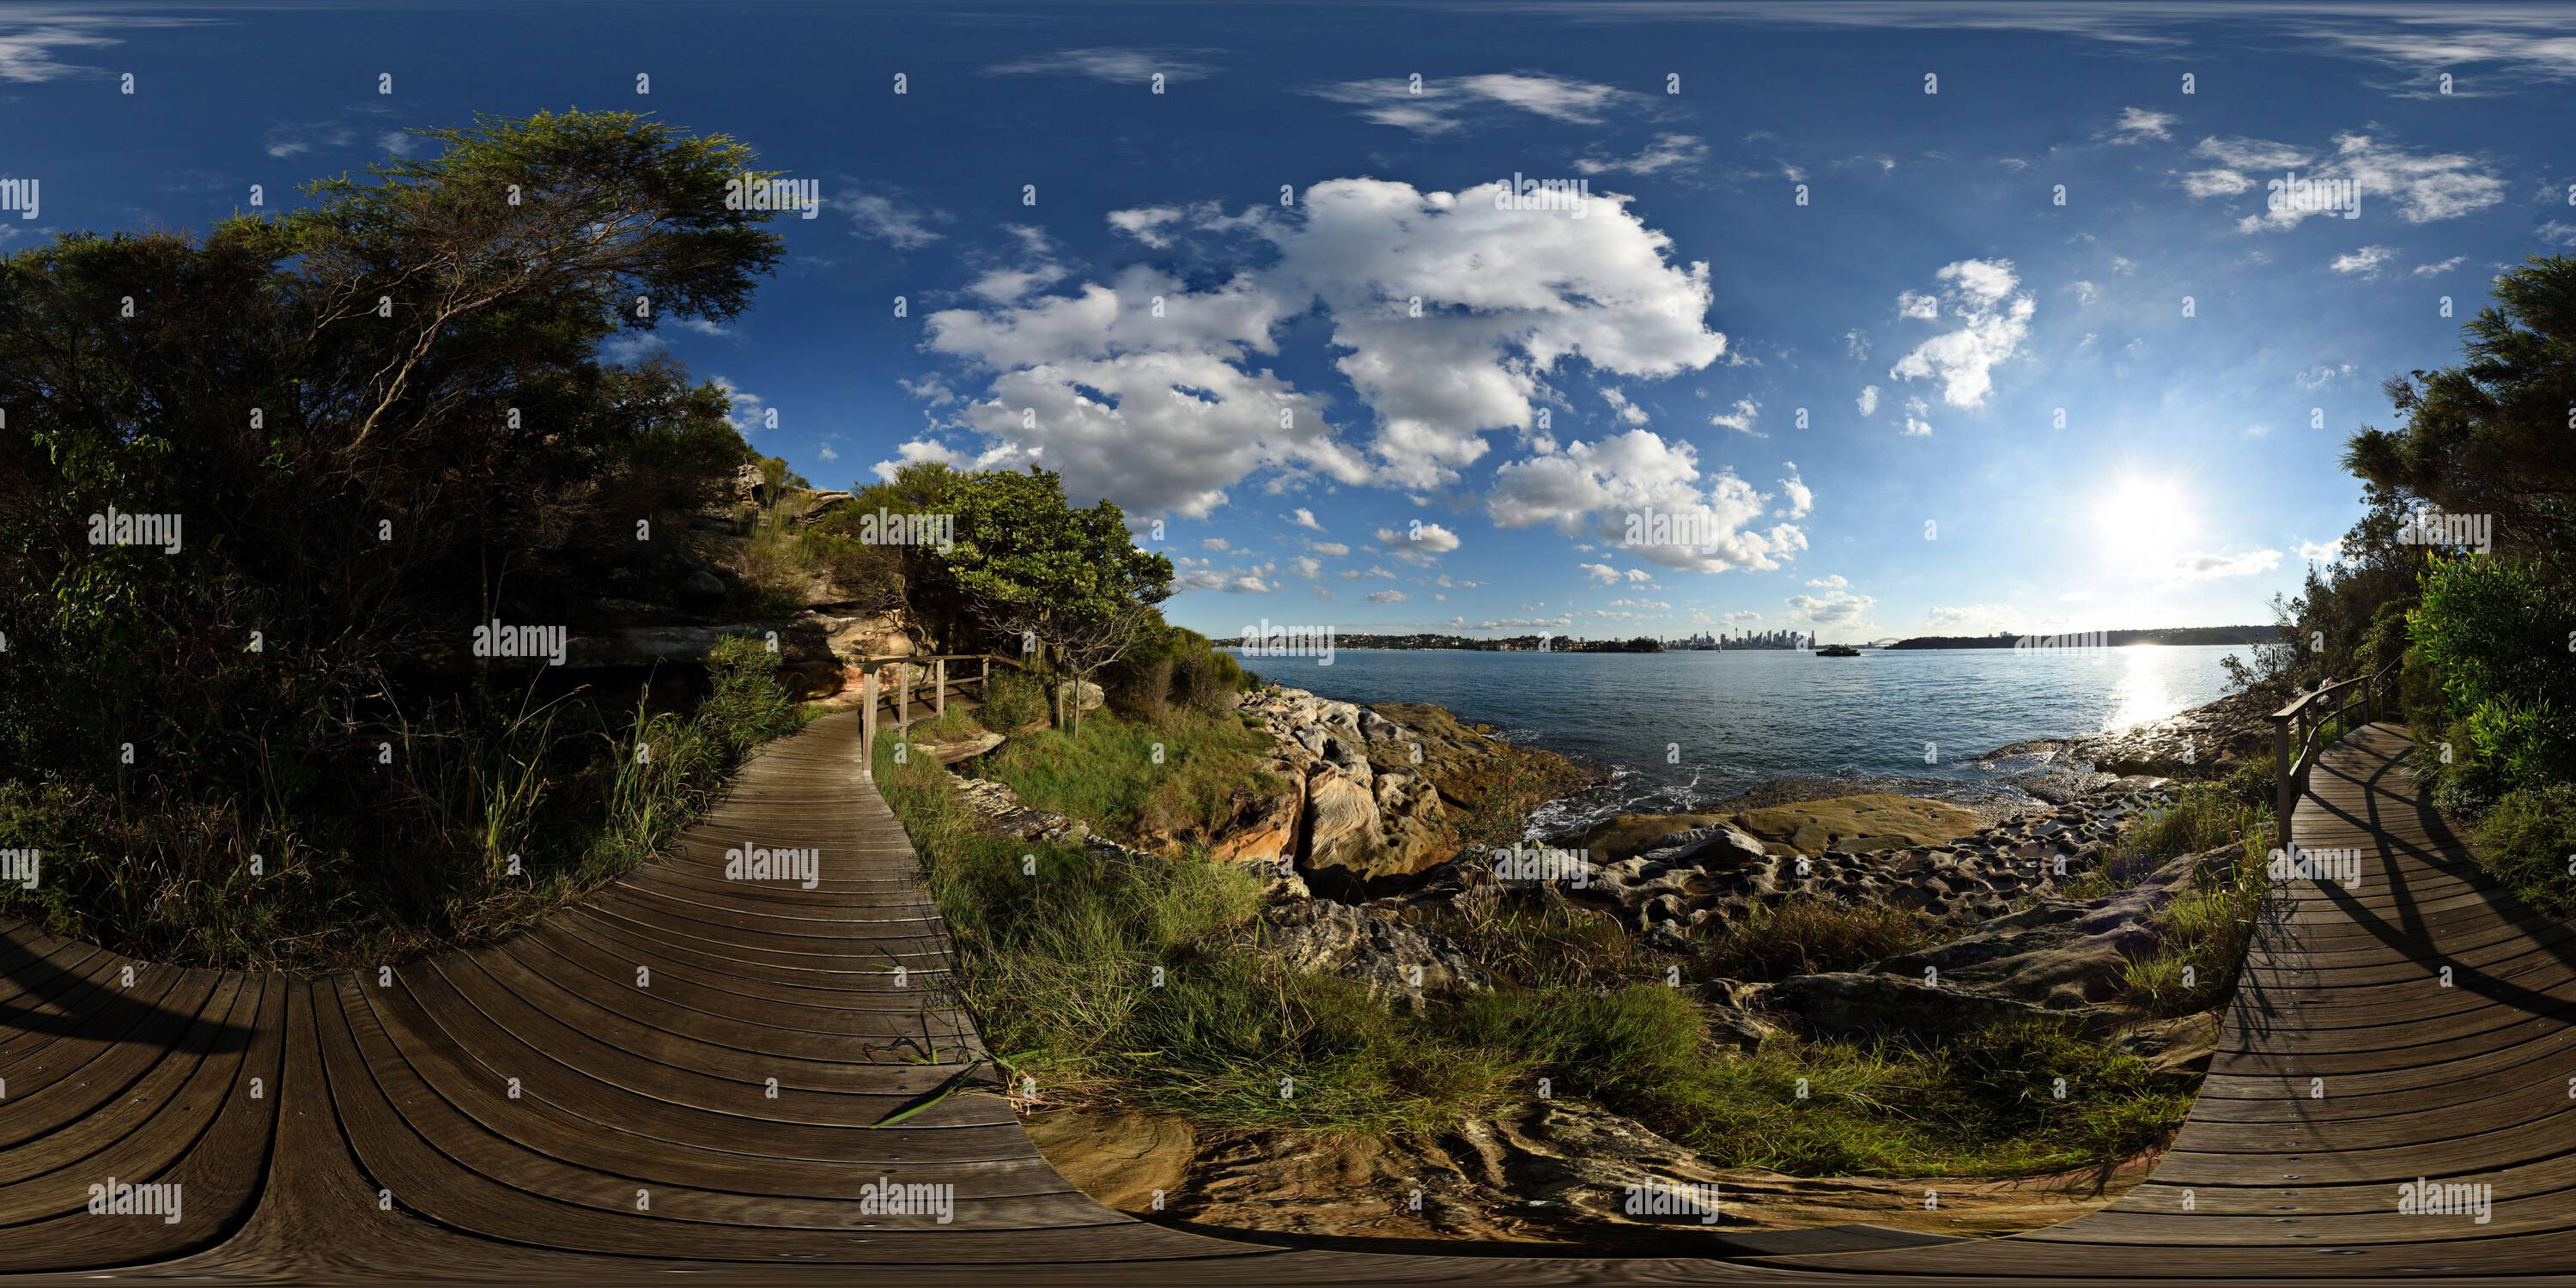 360 degree panoramic view of Sandstone and Water -Harbour Views from the Hermitage Foreshore Track, Sydney Harbour National Park, 360° panorama, Sydney, Australia